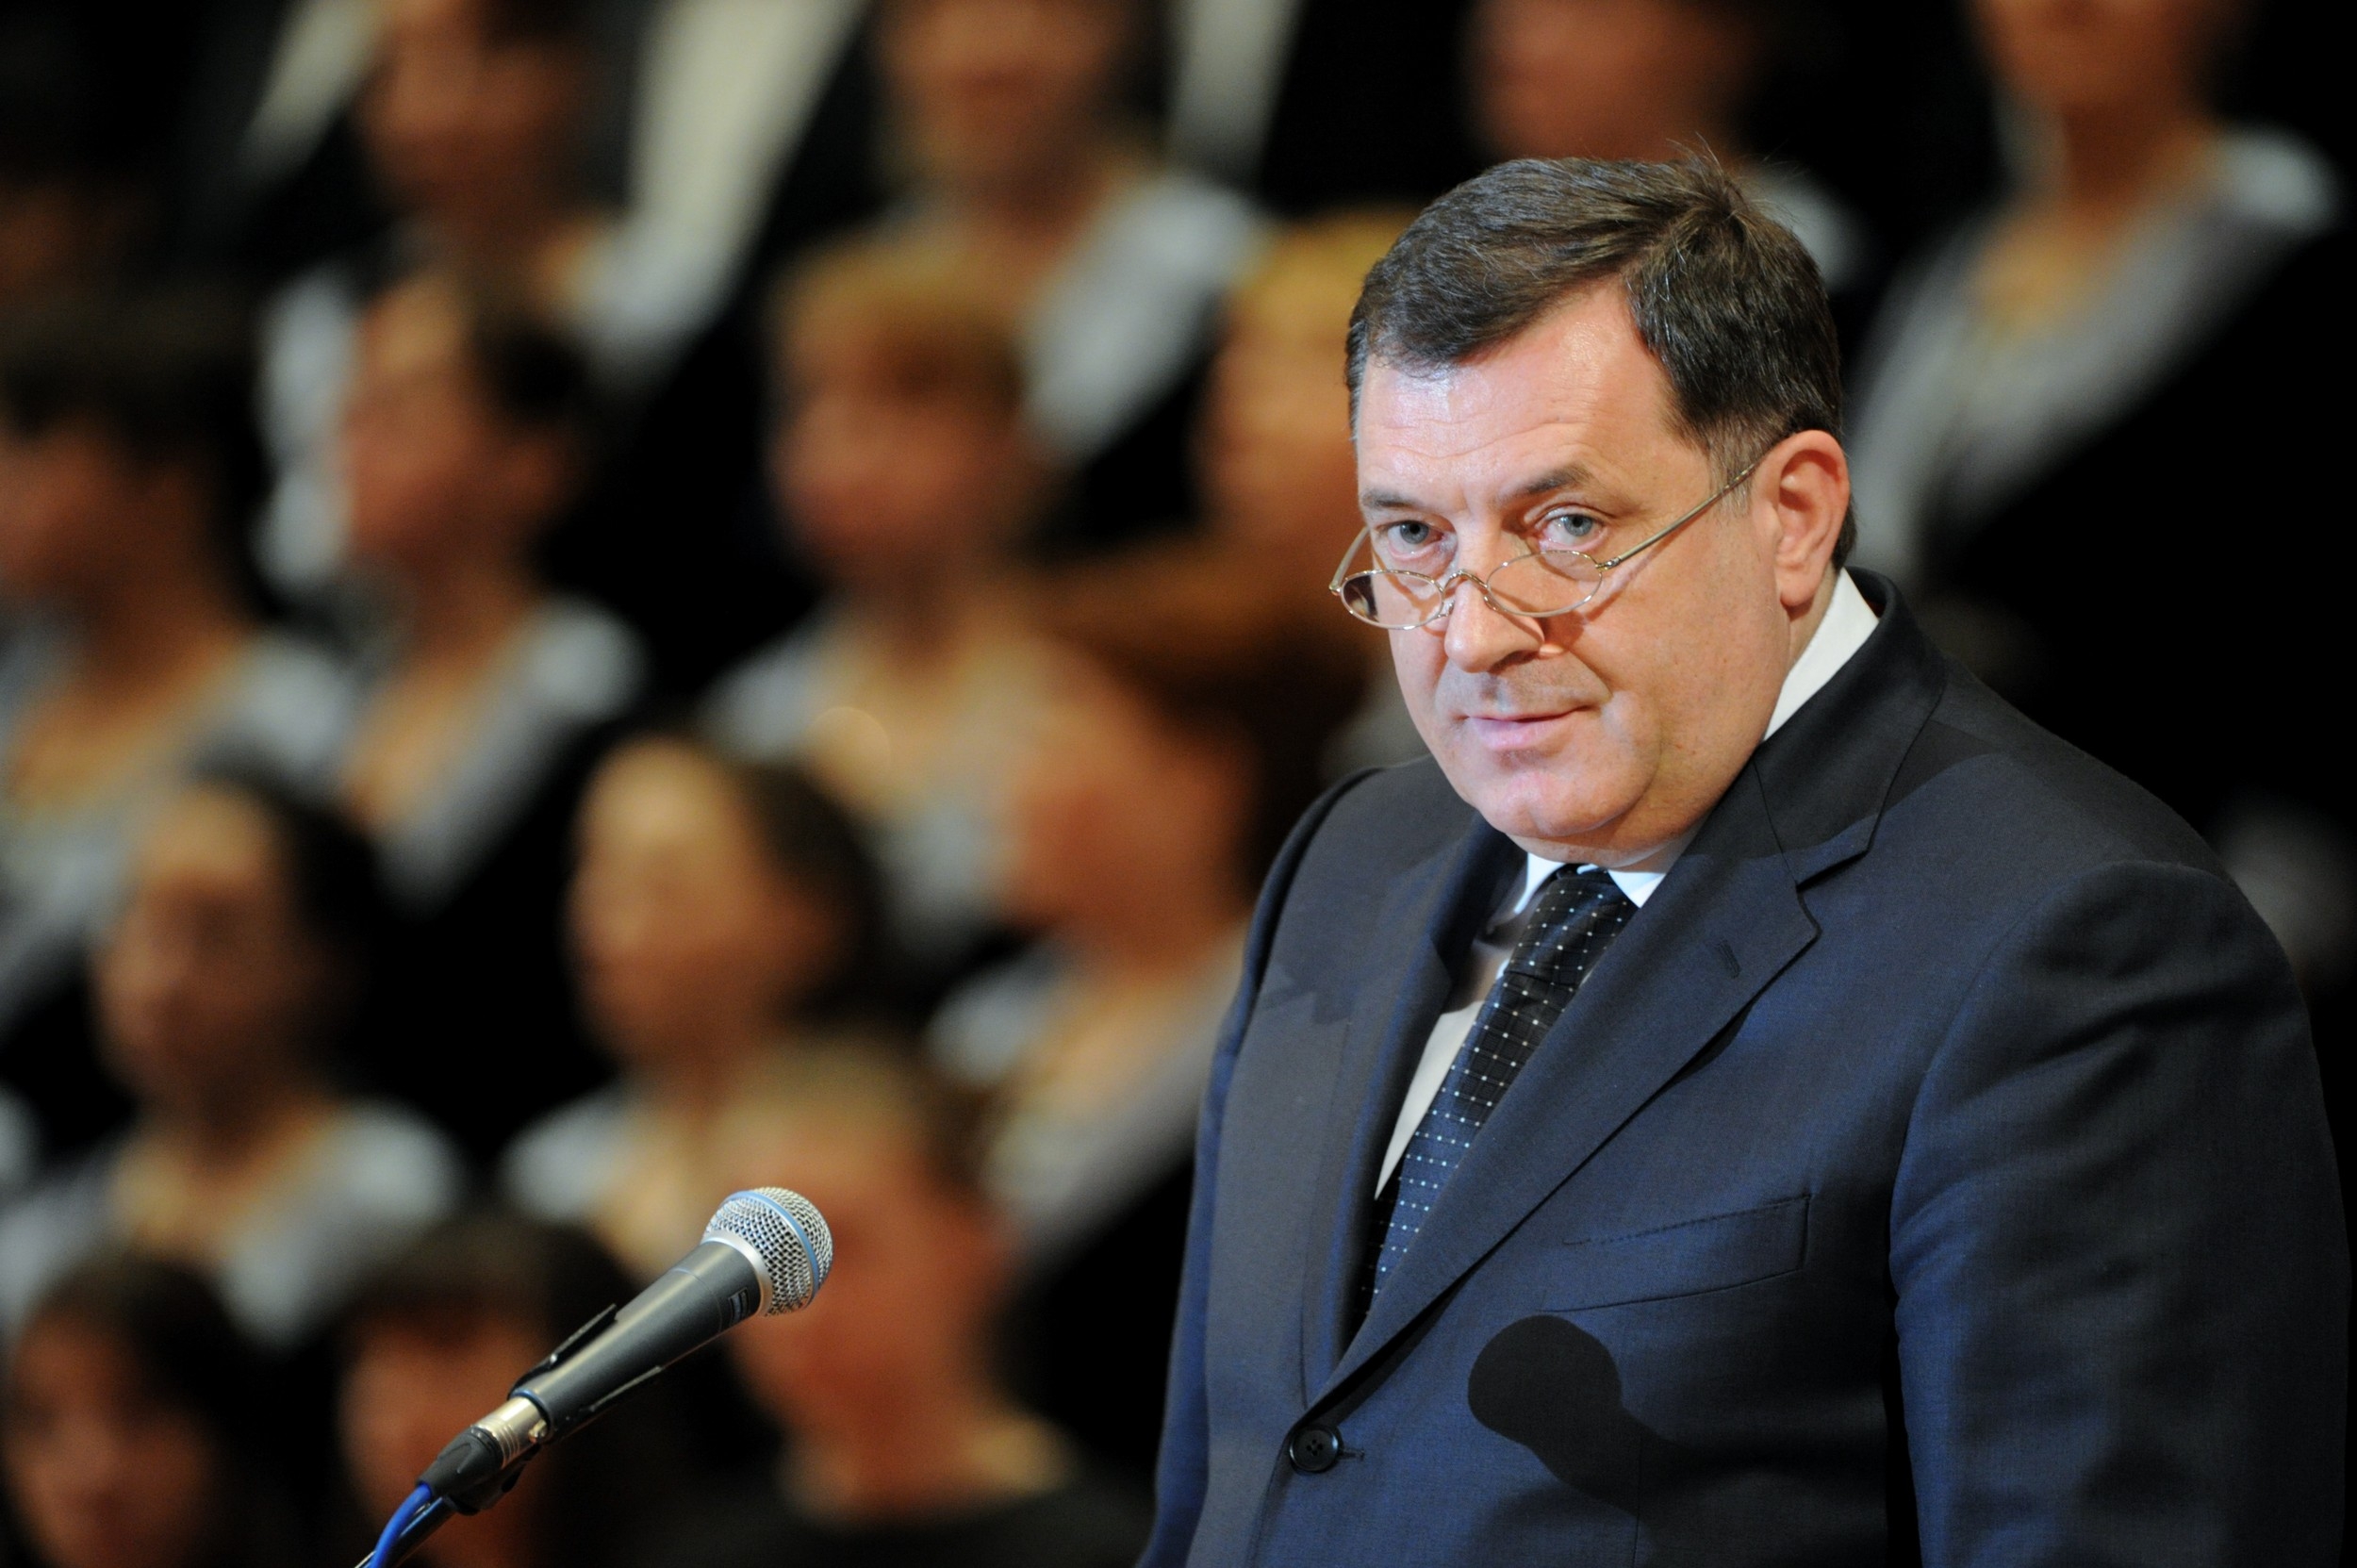 Image: 0186919378, License: Rights managed, 2394990 03/11/2014 Milorad Dodik, President of the Republika Srpska entity of Bosnia and Herzegovina, during the 14th awards ceremony of the International Public Foundation for the Unity of Orthodox Christian Nations. The 2013 award "For outstanding efforts to strengthen the unity of Orthodox peoples and for the approval and promotion of Christian values in society" was given in the name of former Patriarch Alexei II., Place: Russia, Model Release: No or not aplicable, Credit line: Profimedia.com, Ria Novosti